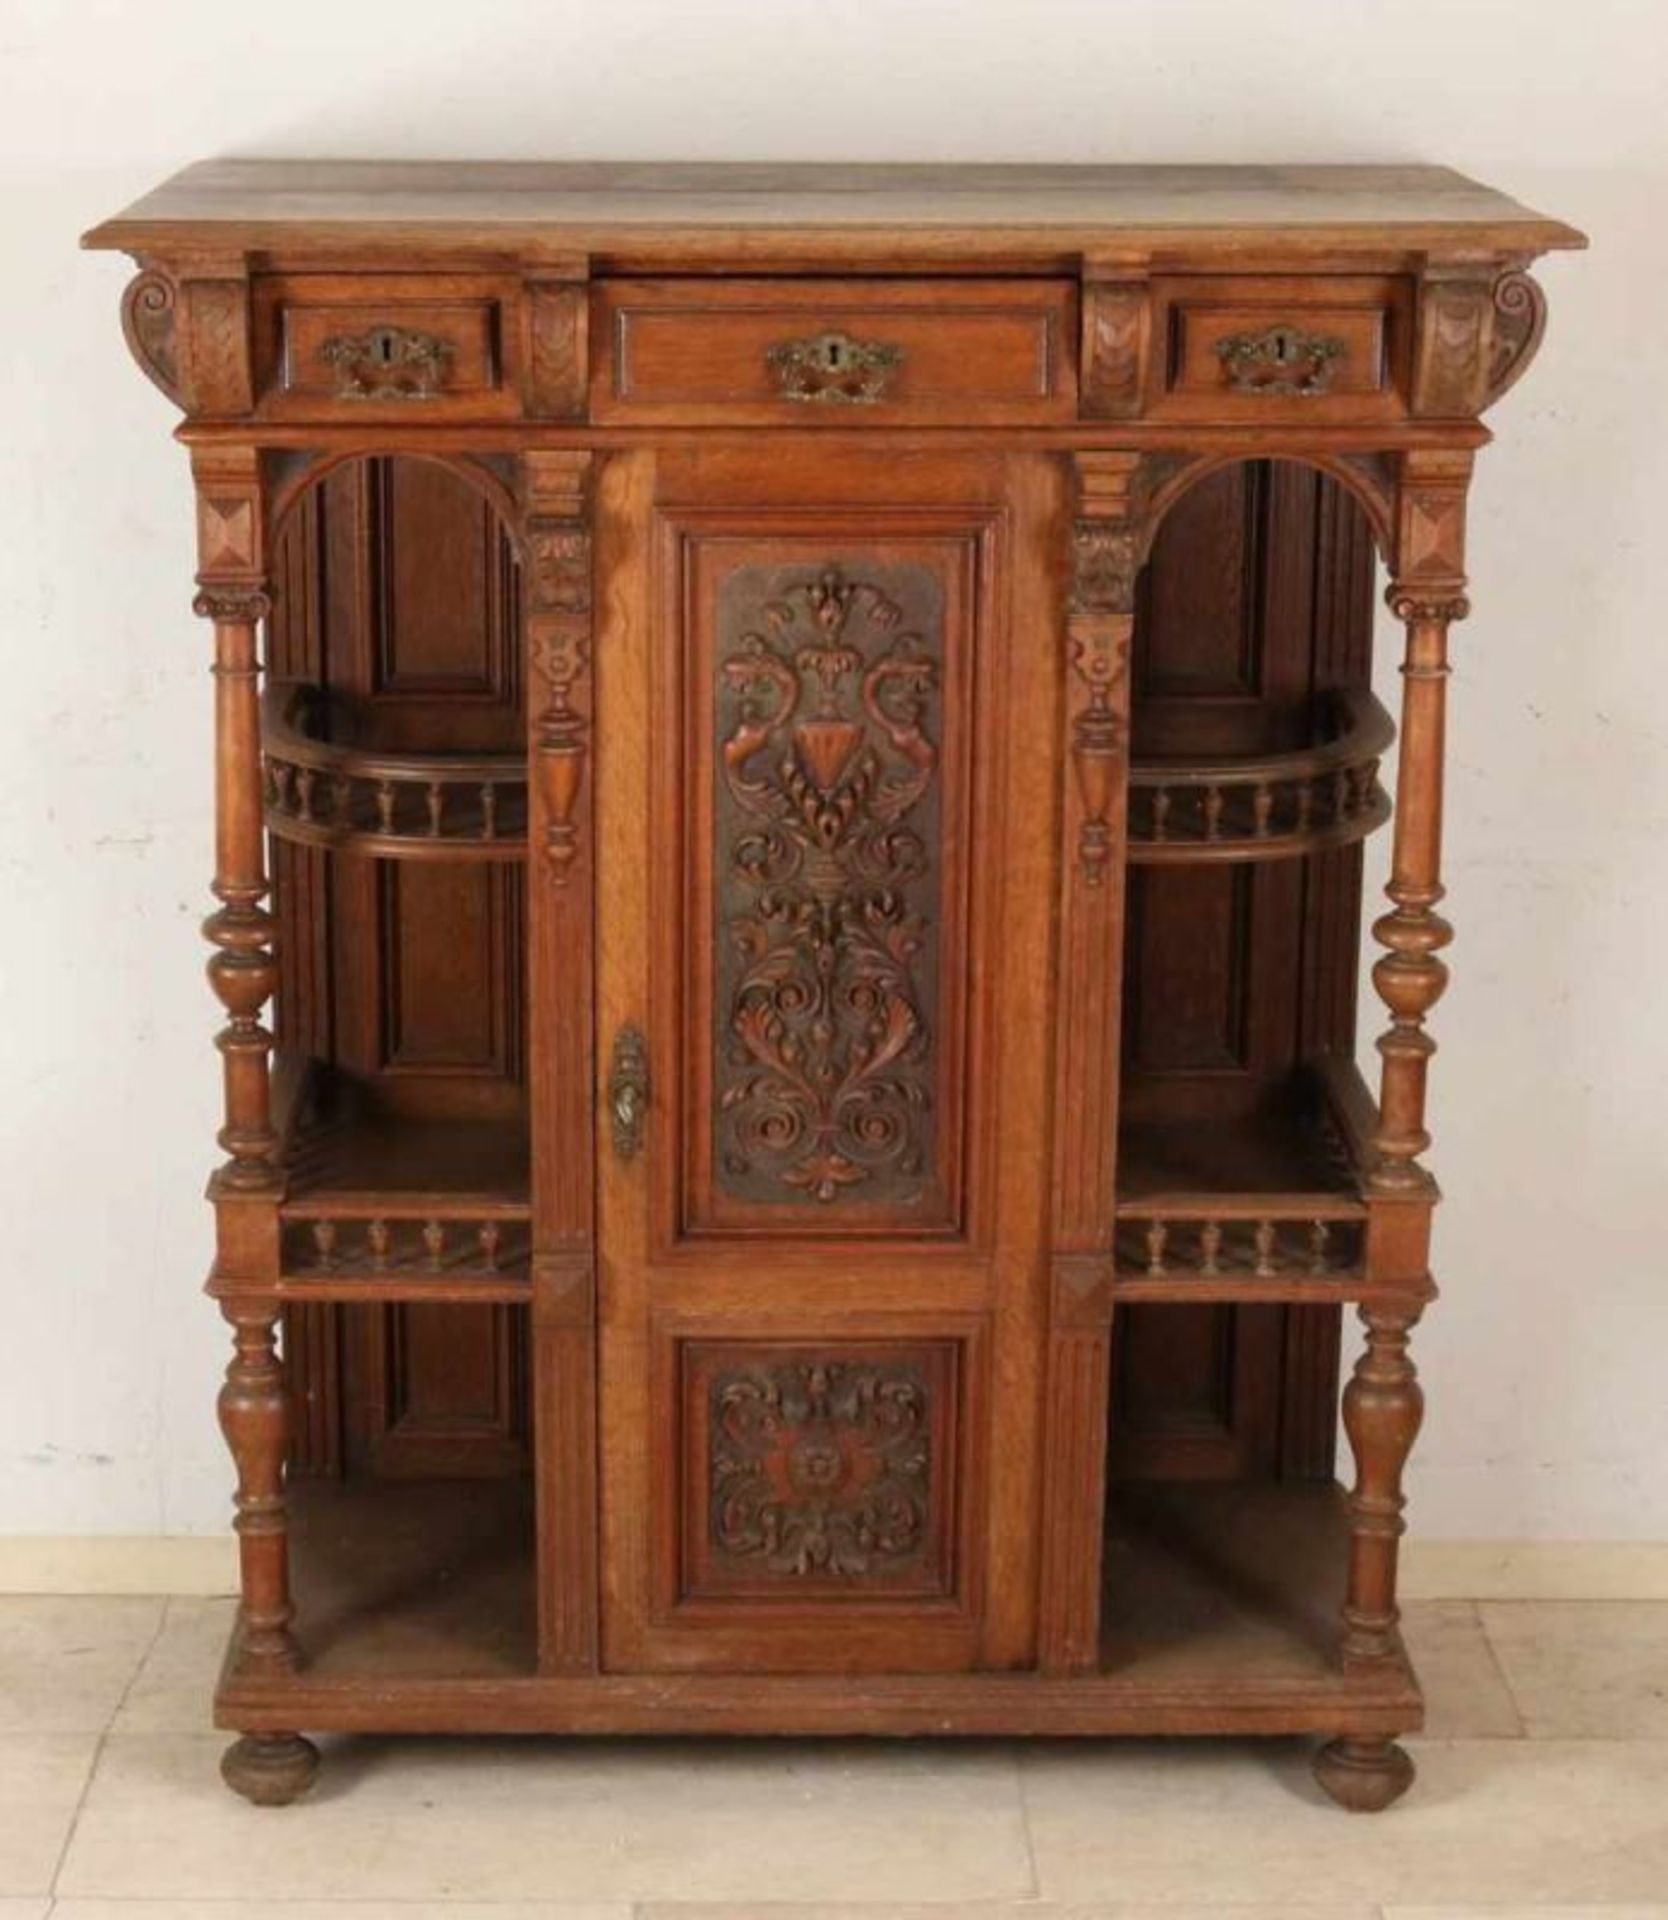 German solid oak Gründerzeit vertico with full columns and carvings. In its original state. Circa